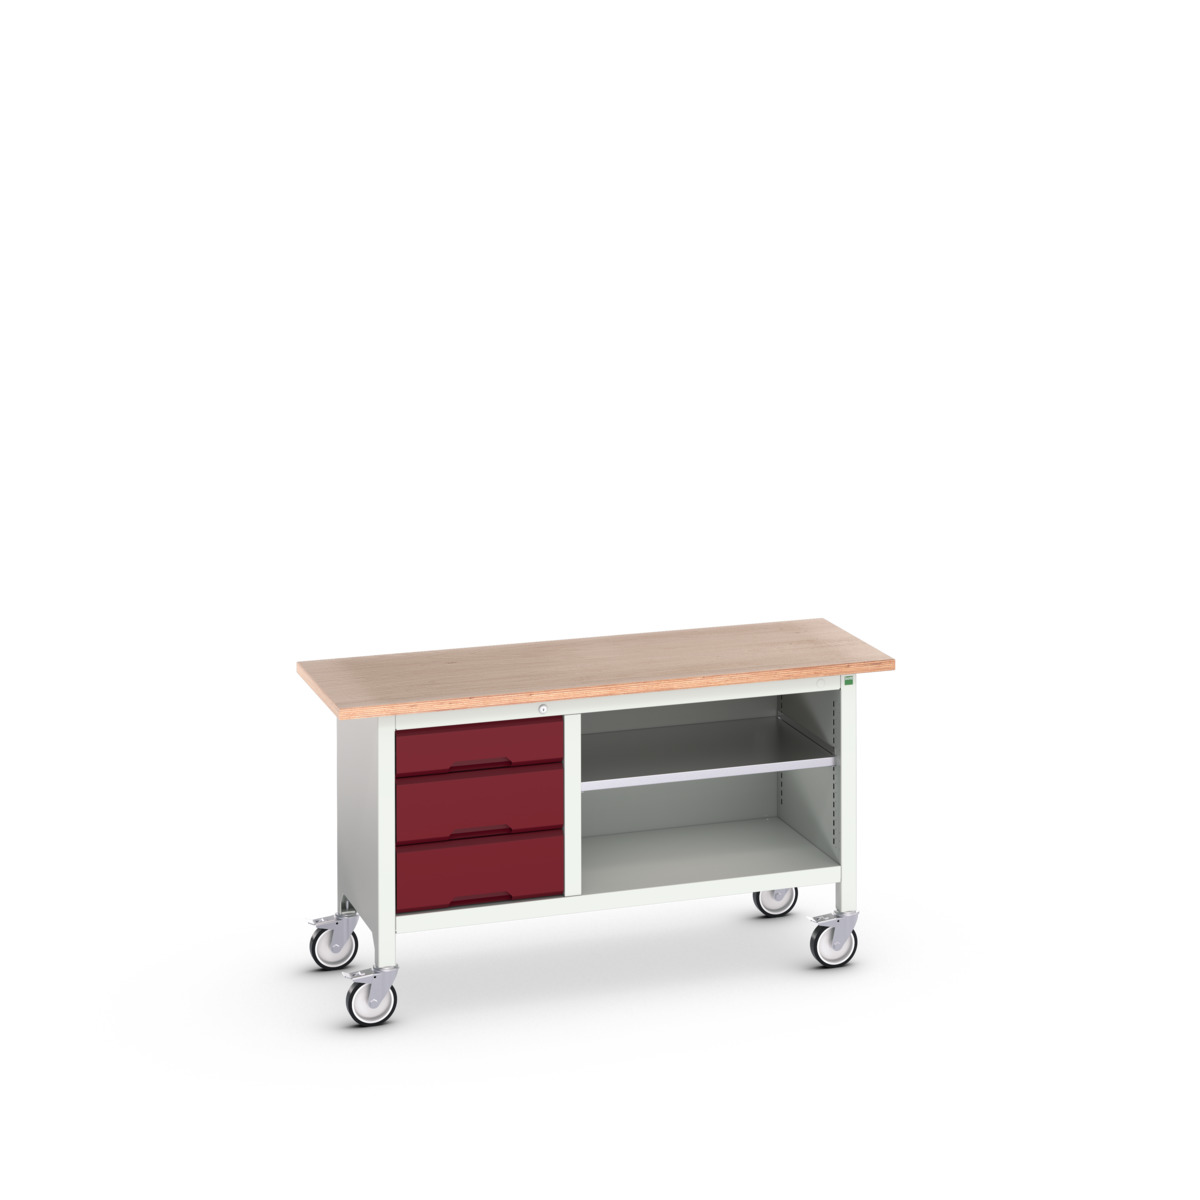 16923212.24 - verso mobile storage bench (mpx)